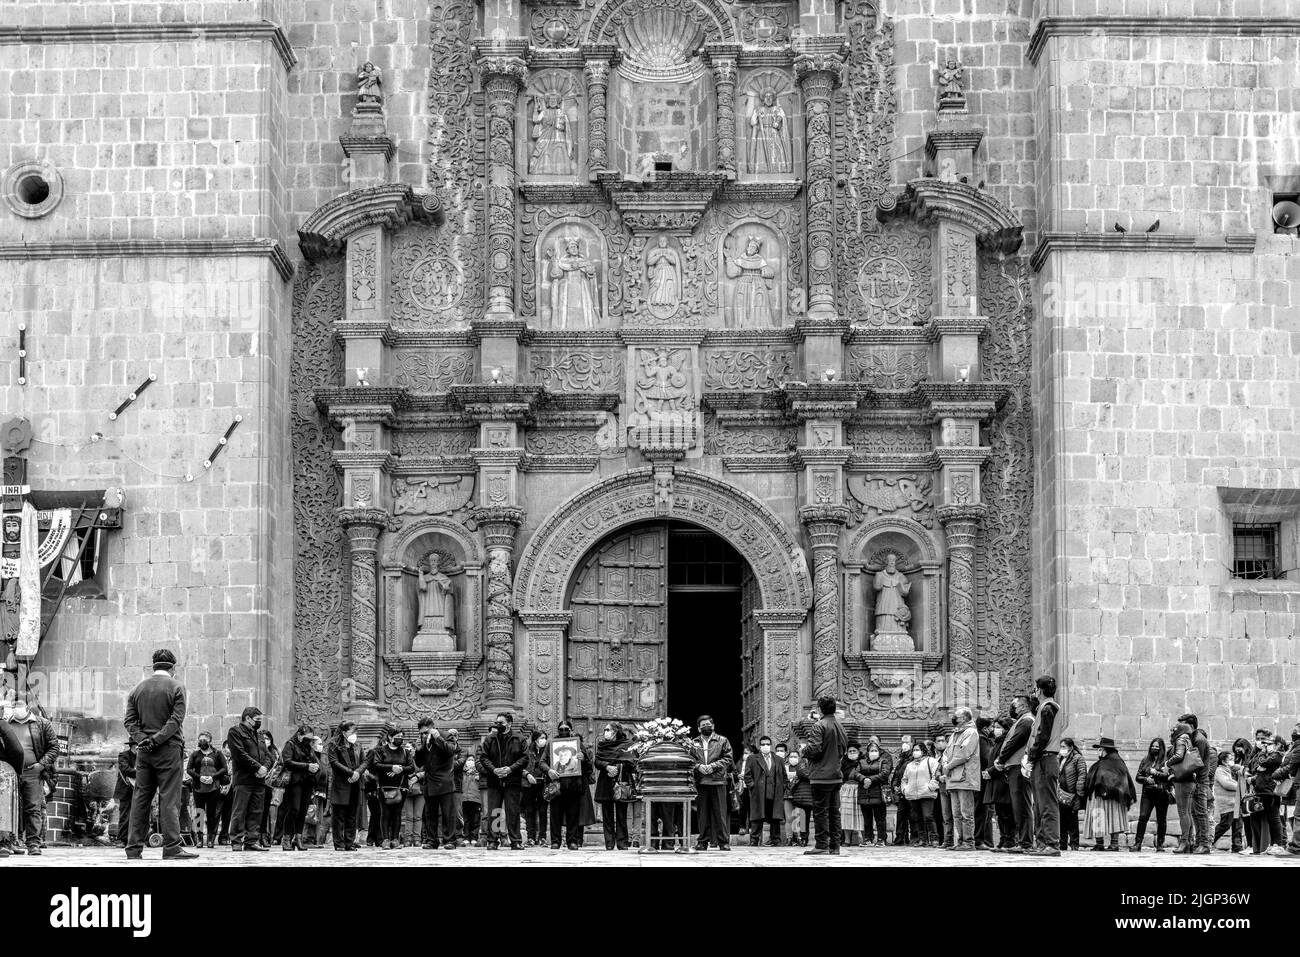 Local People Attend A Funeral At The Puno Cathedral In Plaza De Armas, Puno, Puno Province, Peru. Stock Photo